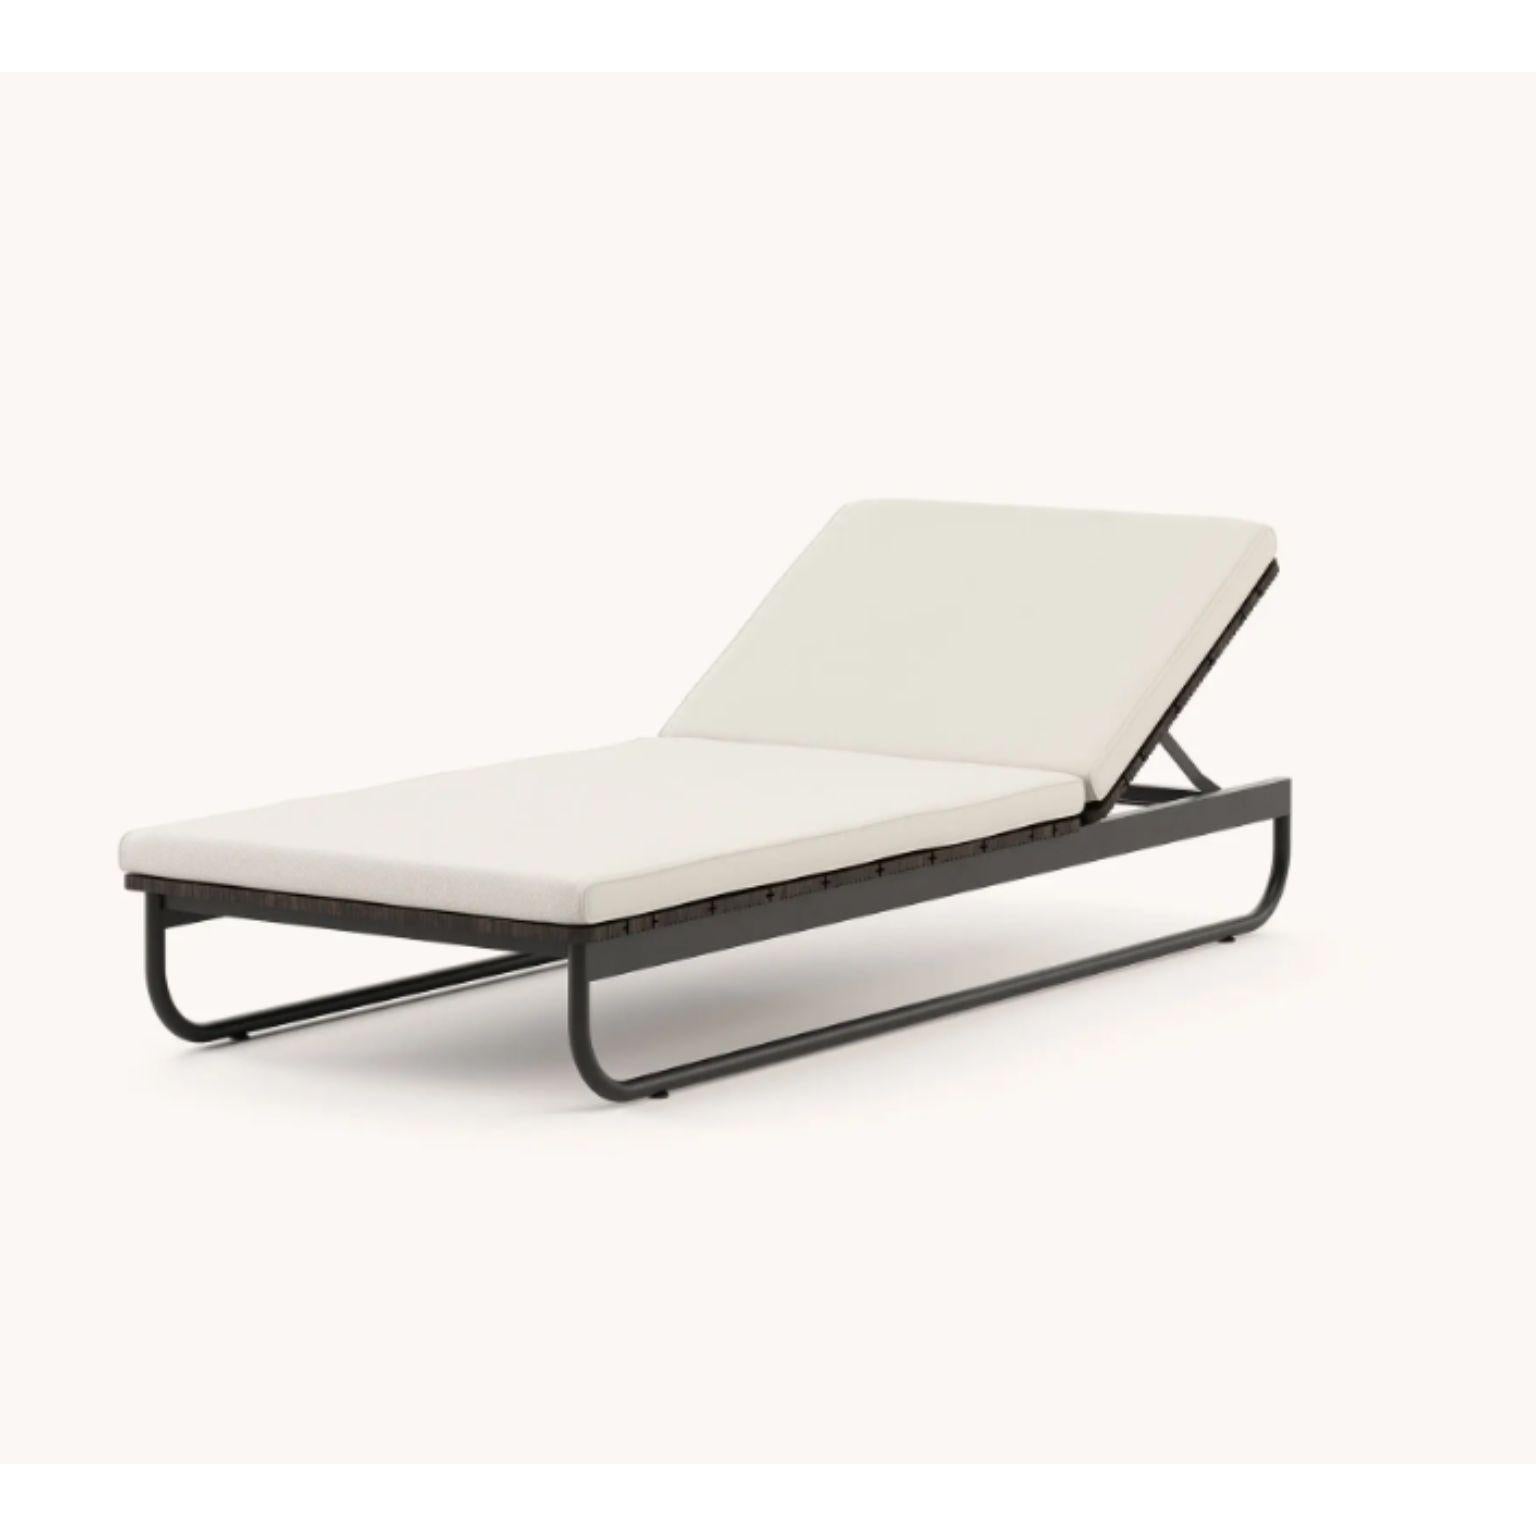 Copacabana Lounger by Domkapa
Materials: black texturized stainless steel, bamboo wood, fabric (Rhine Ice).
Dimensions: W 203 x D 85 x H 33.5 cm.
Also available in different materials. 

Your garden will provide you moments of comfort for its